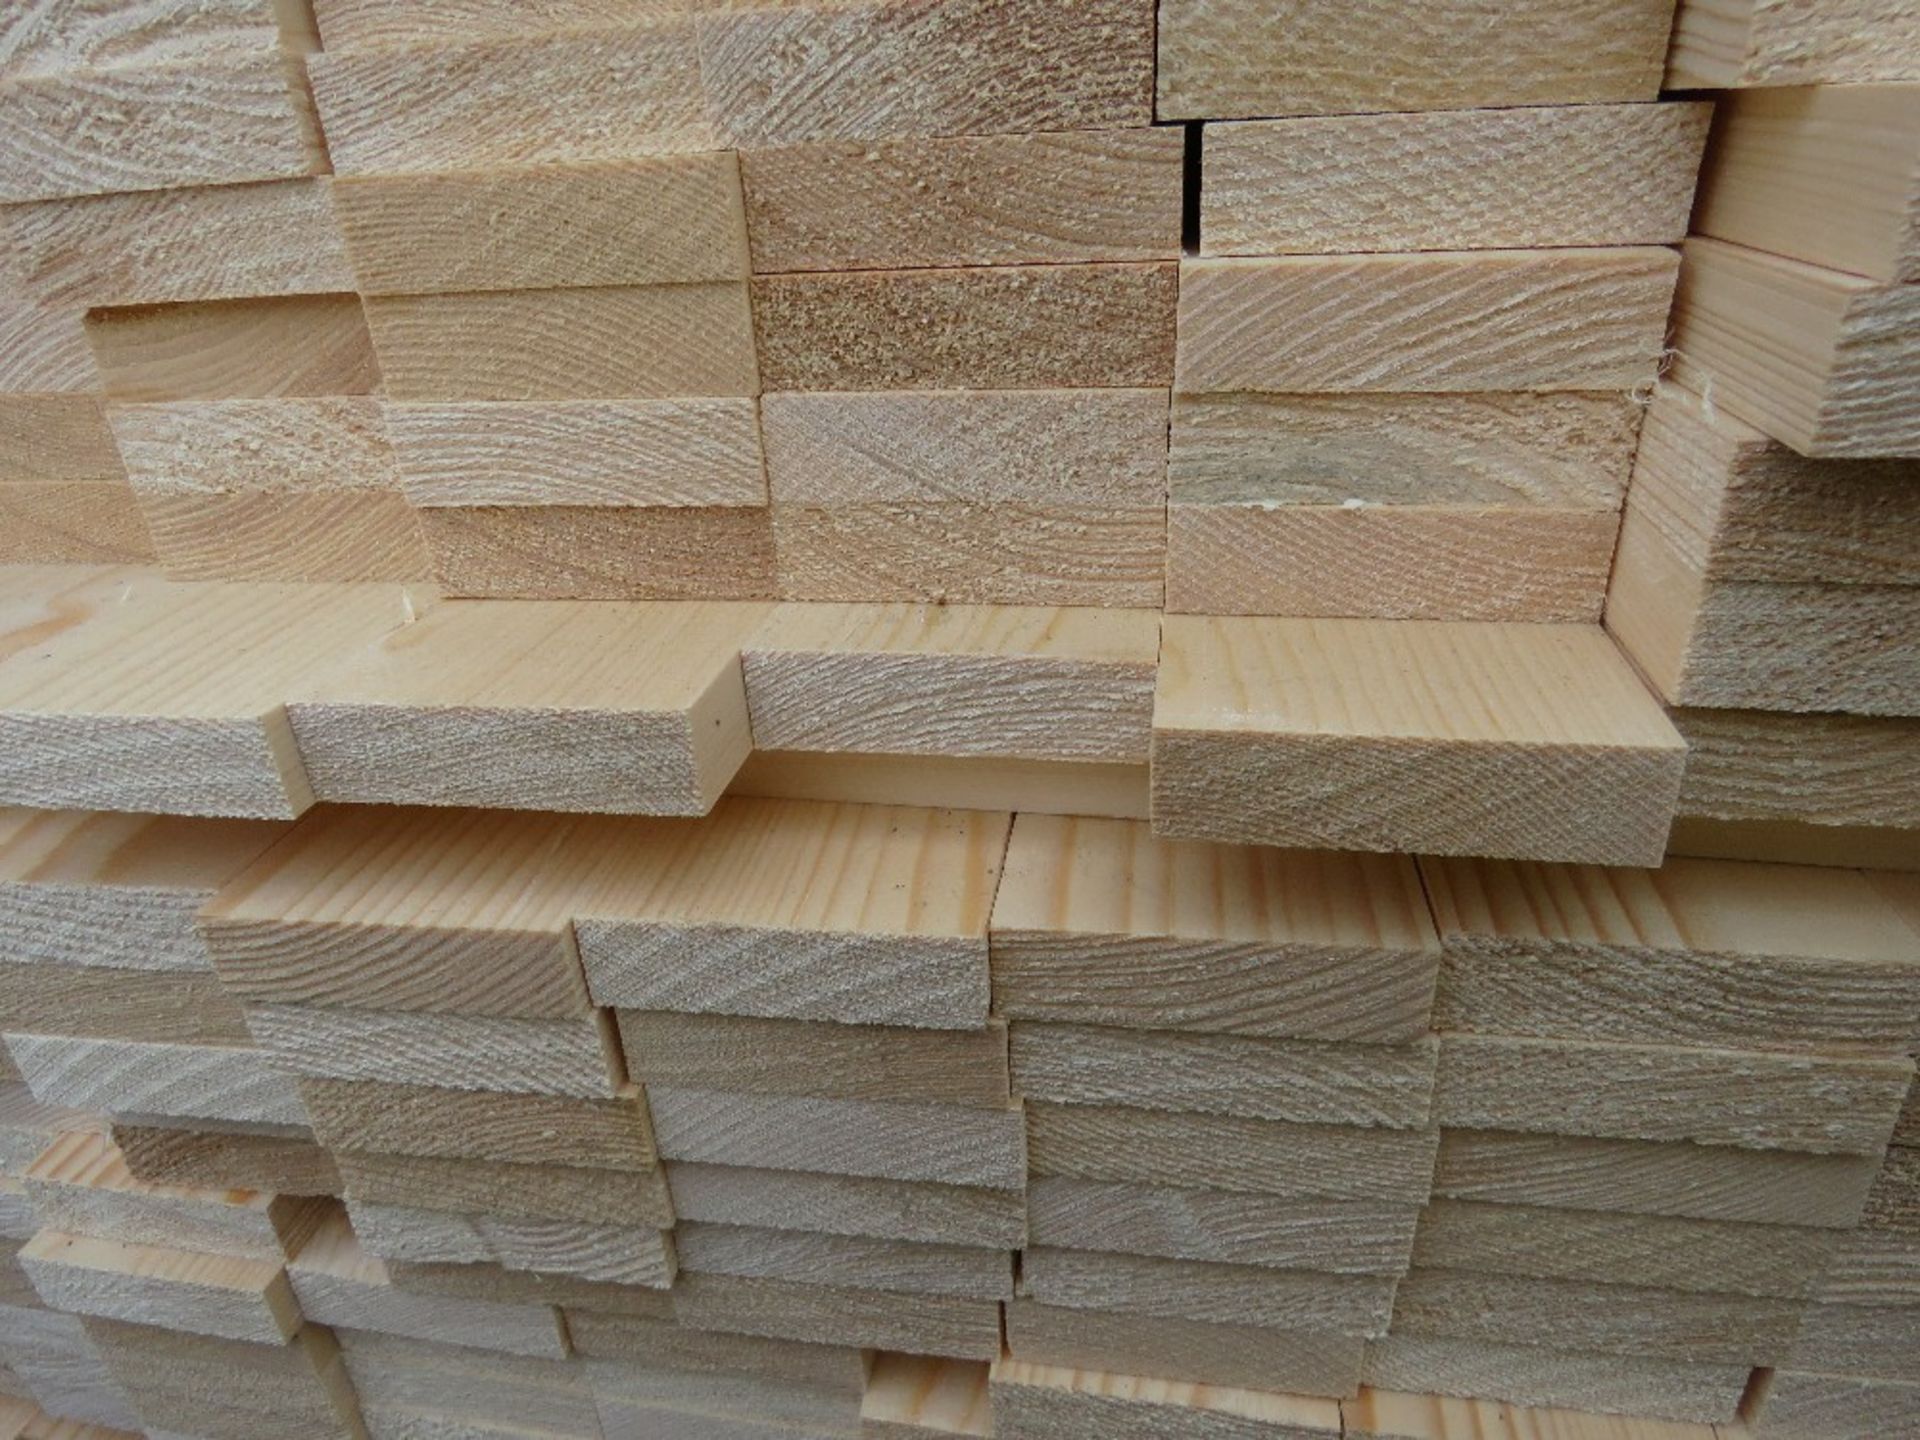 EXTRA LARGE PACK OF UNTREATED TIMBER BATTENS: 1.0M X 70MM X 20MM APPROX. - Image 3 of 3